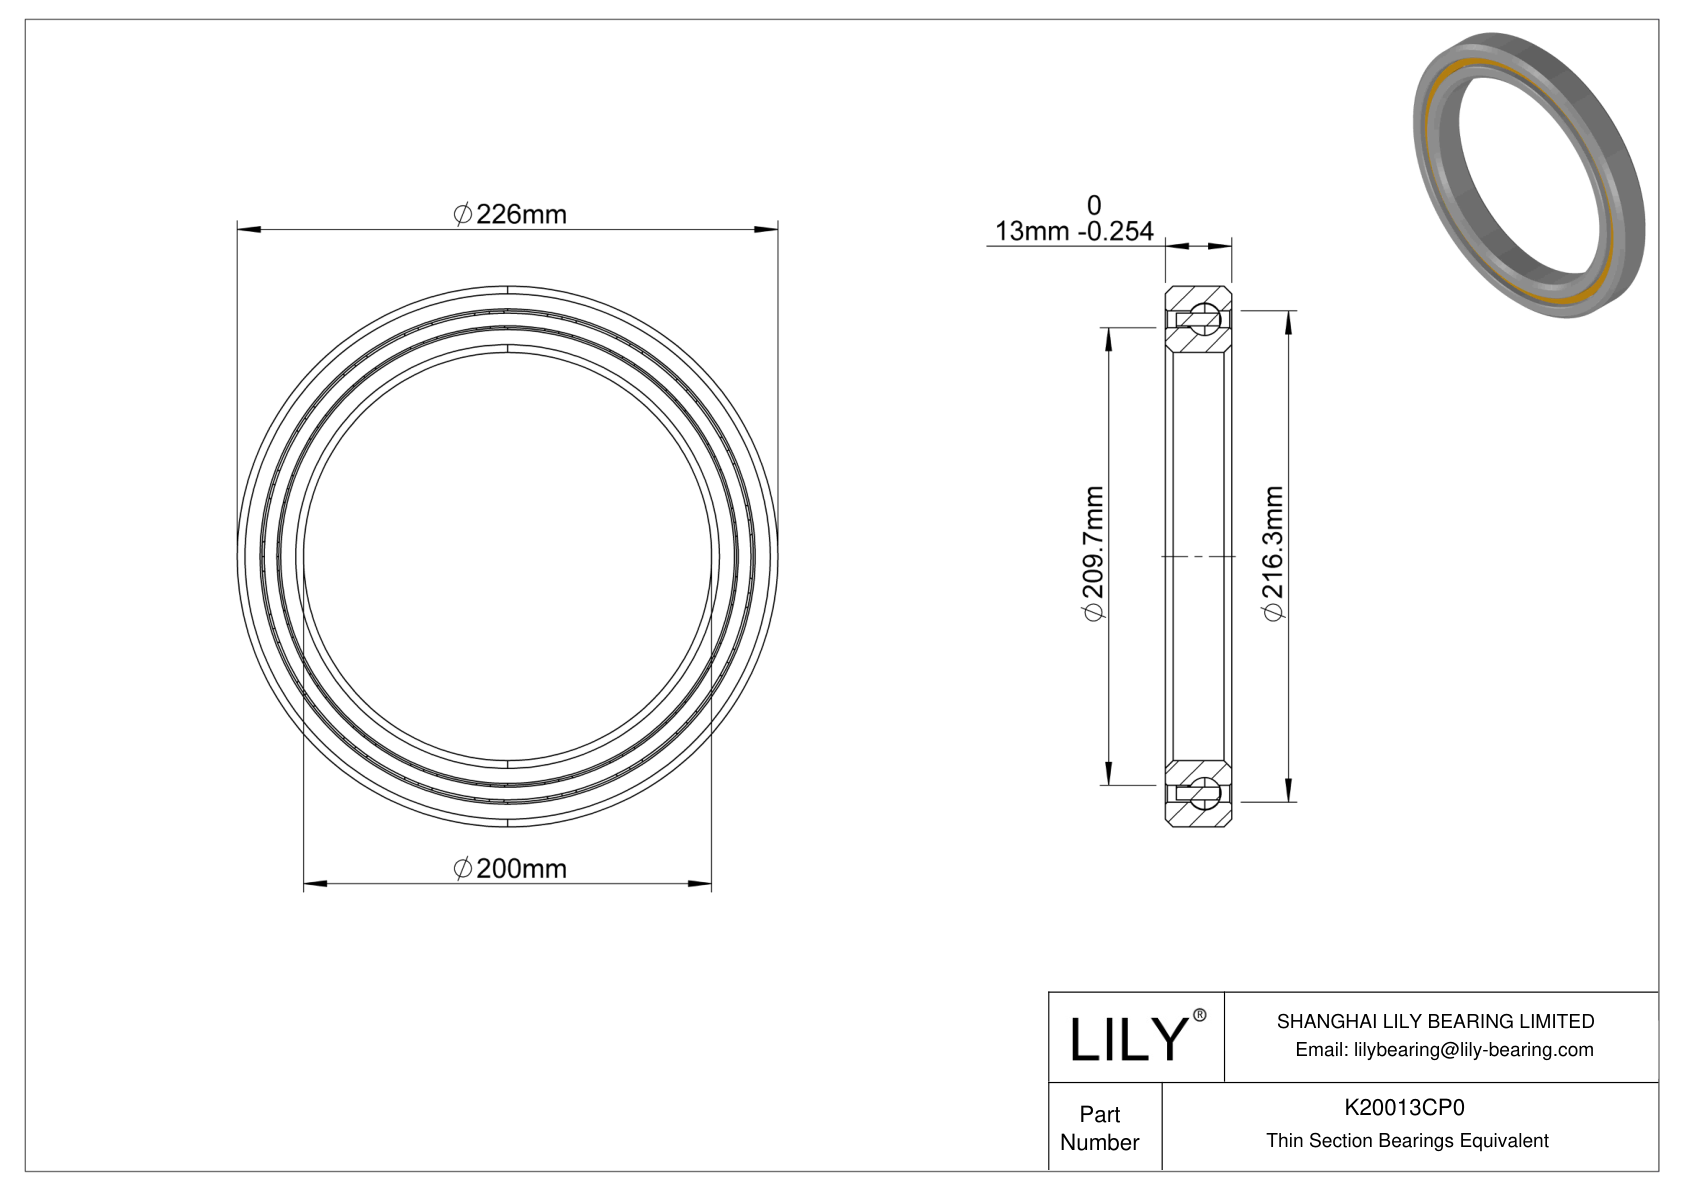 K20013CP0 Constant Section (CS) Bearings cad drawing